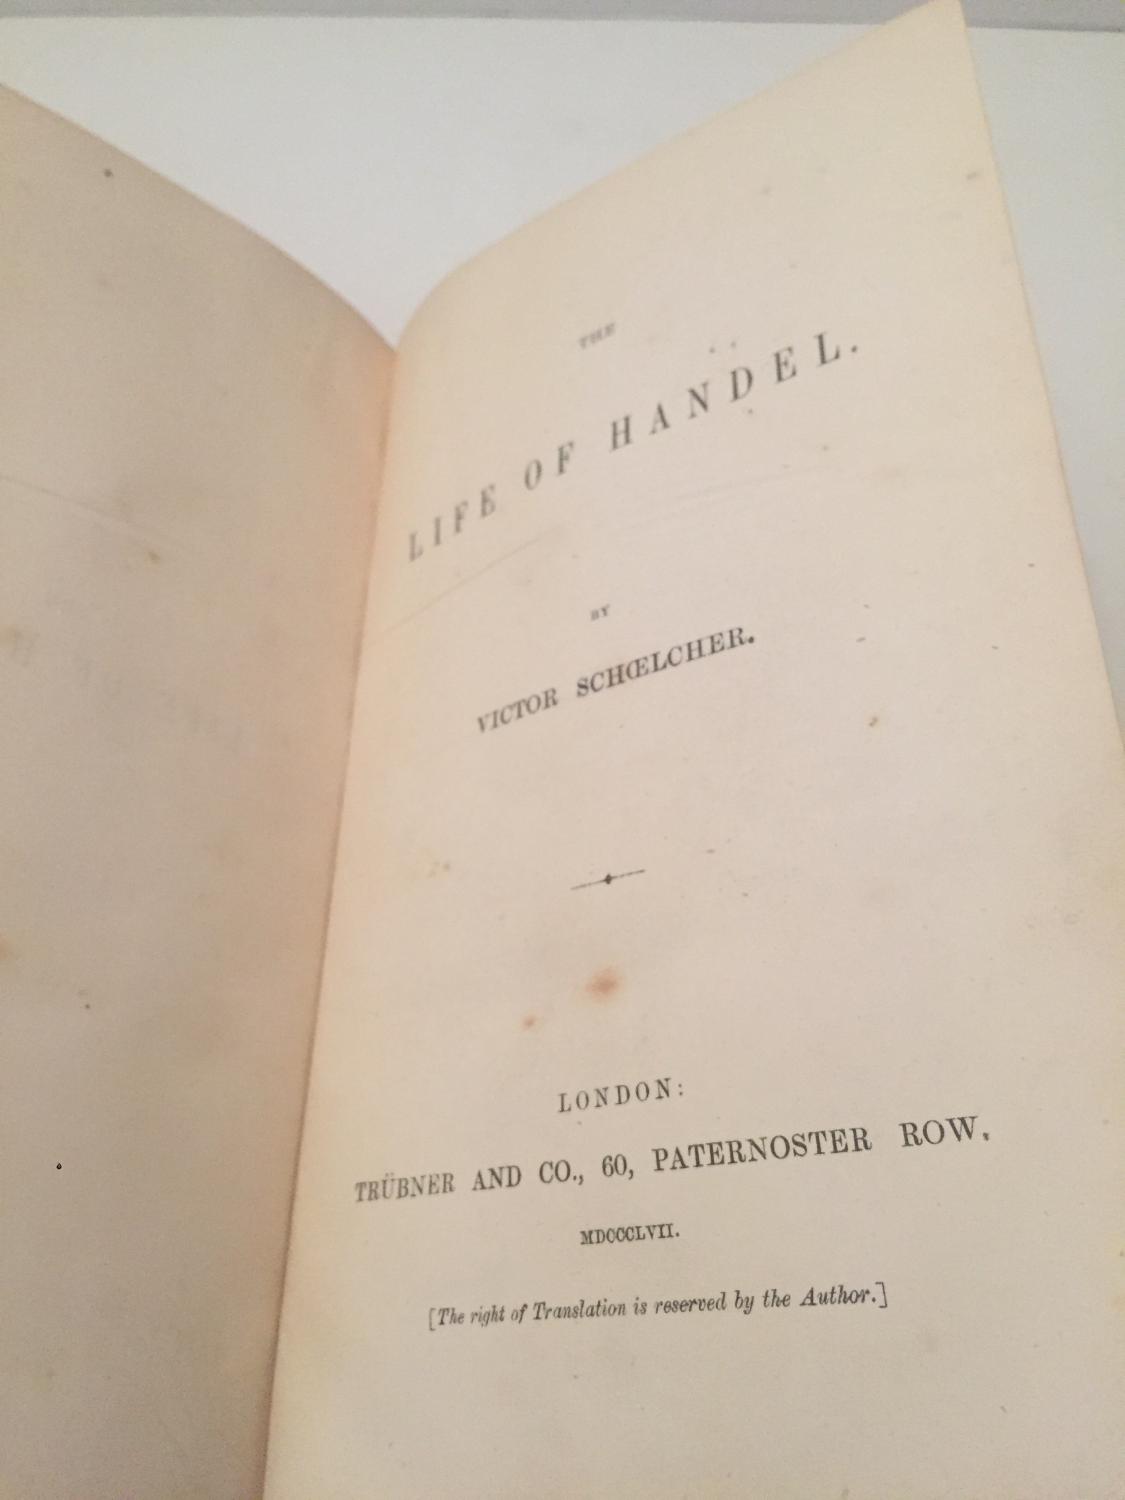 The Life of Handel book image